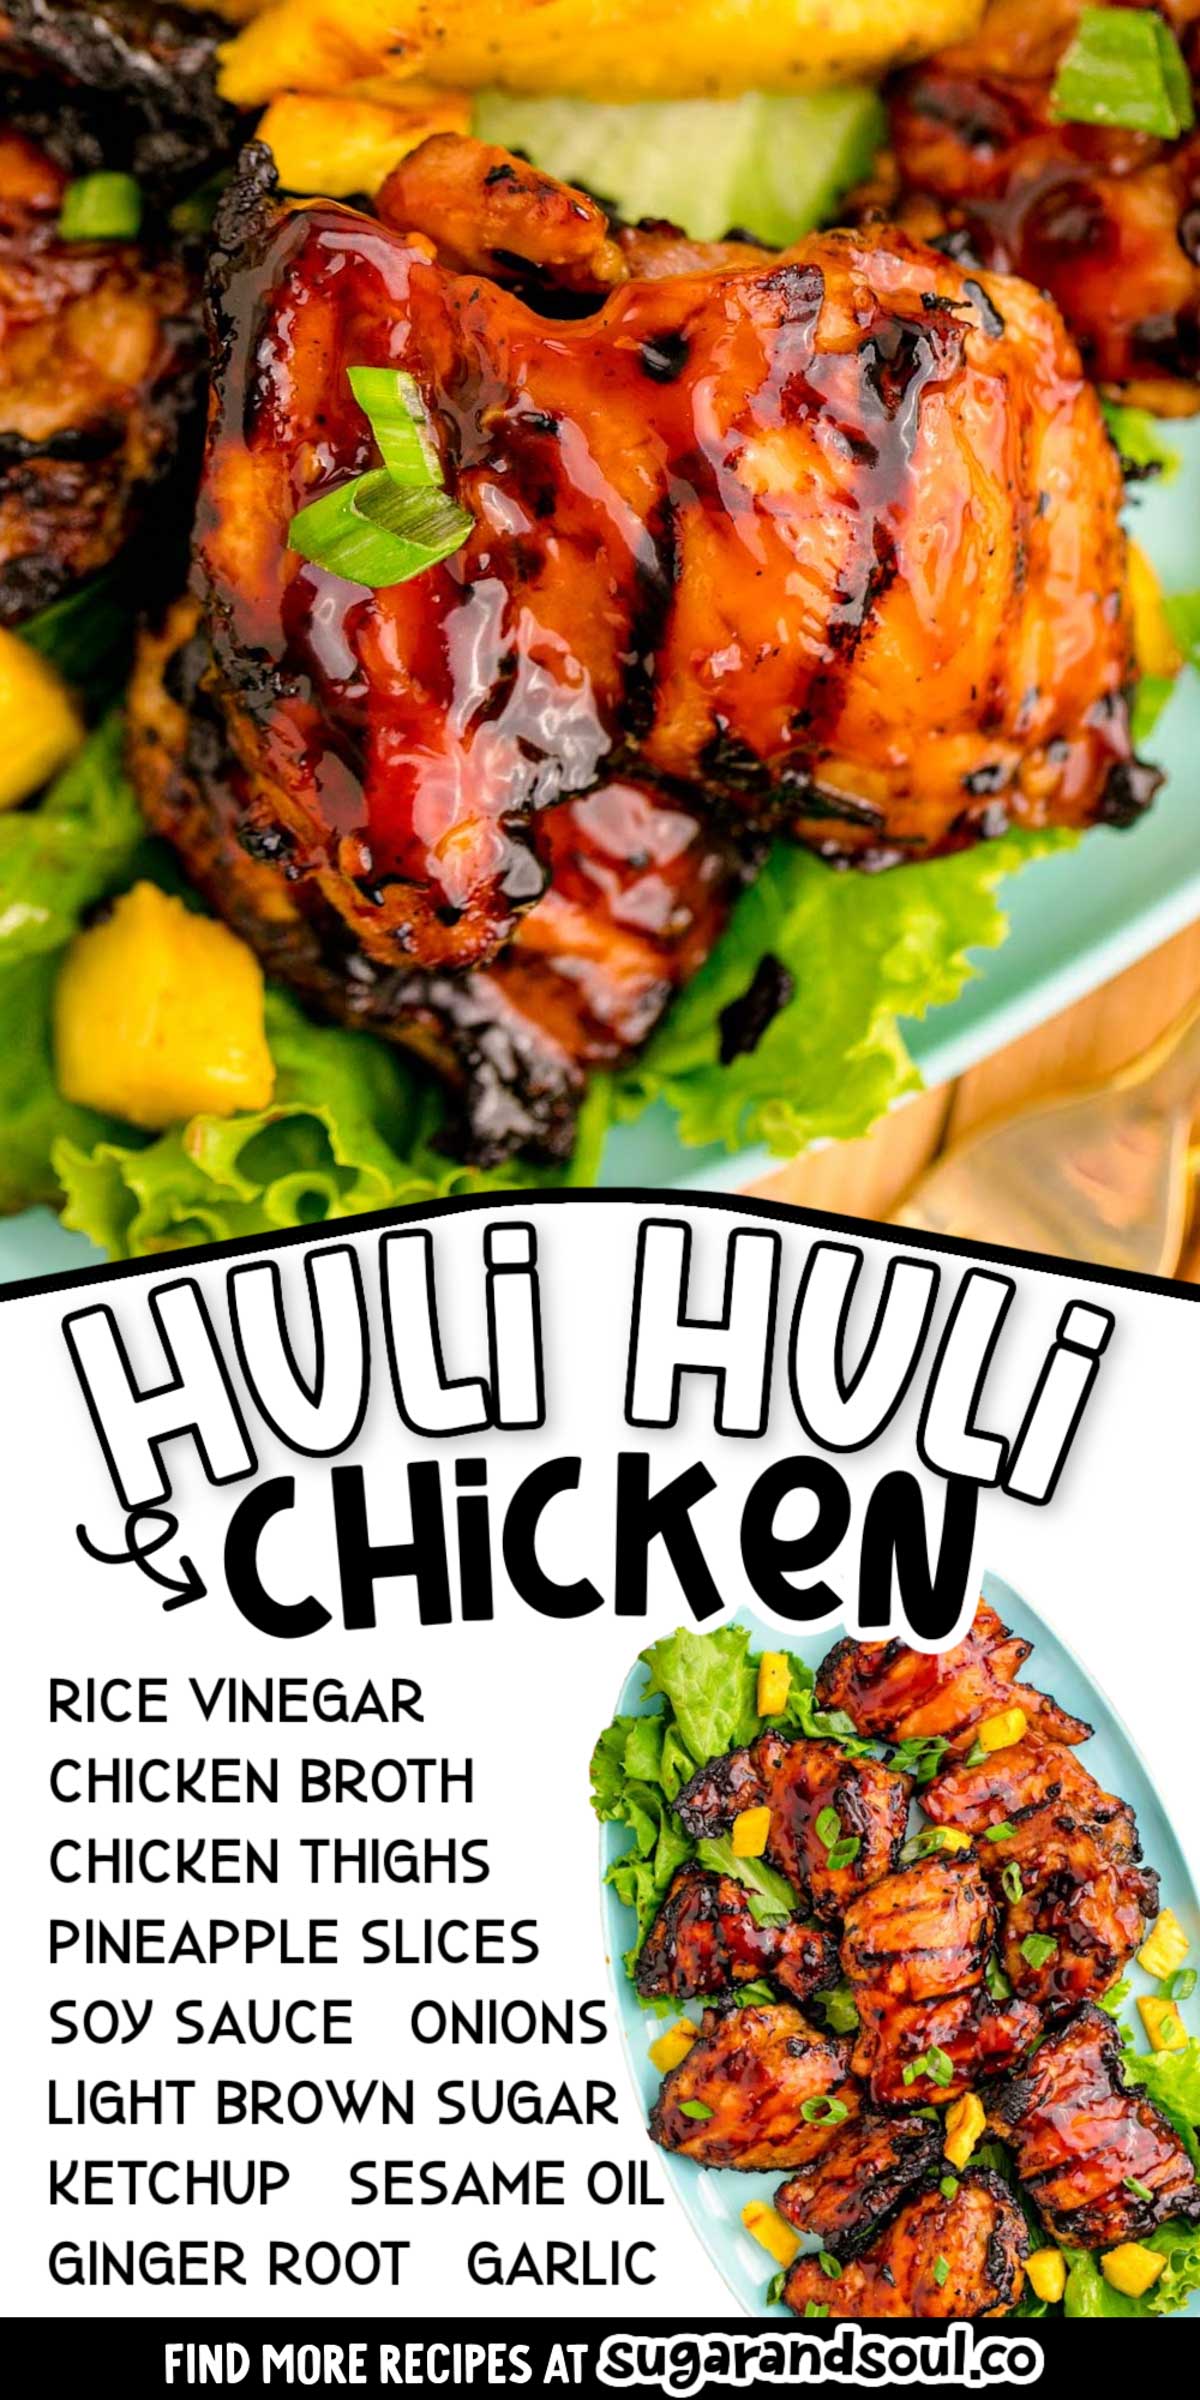 Grilled Huli Huli Chicken marinates chicken thighs in a sweet, savory sauce that delivers tender, juicy meat after just 10 minutes of cooking! Prep it the night before for an easy dinner option the next day! via @sugarandsoulco